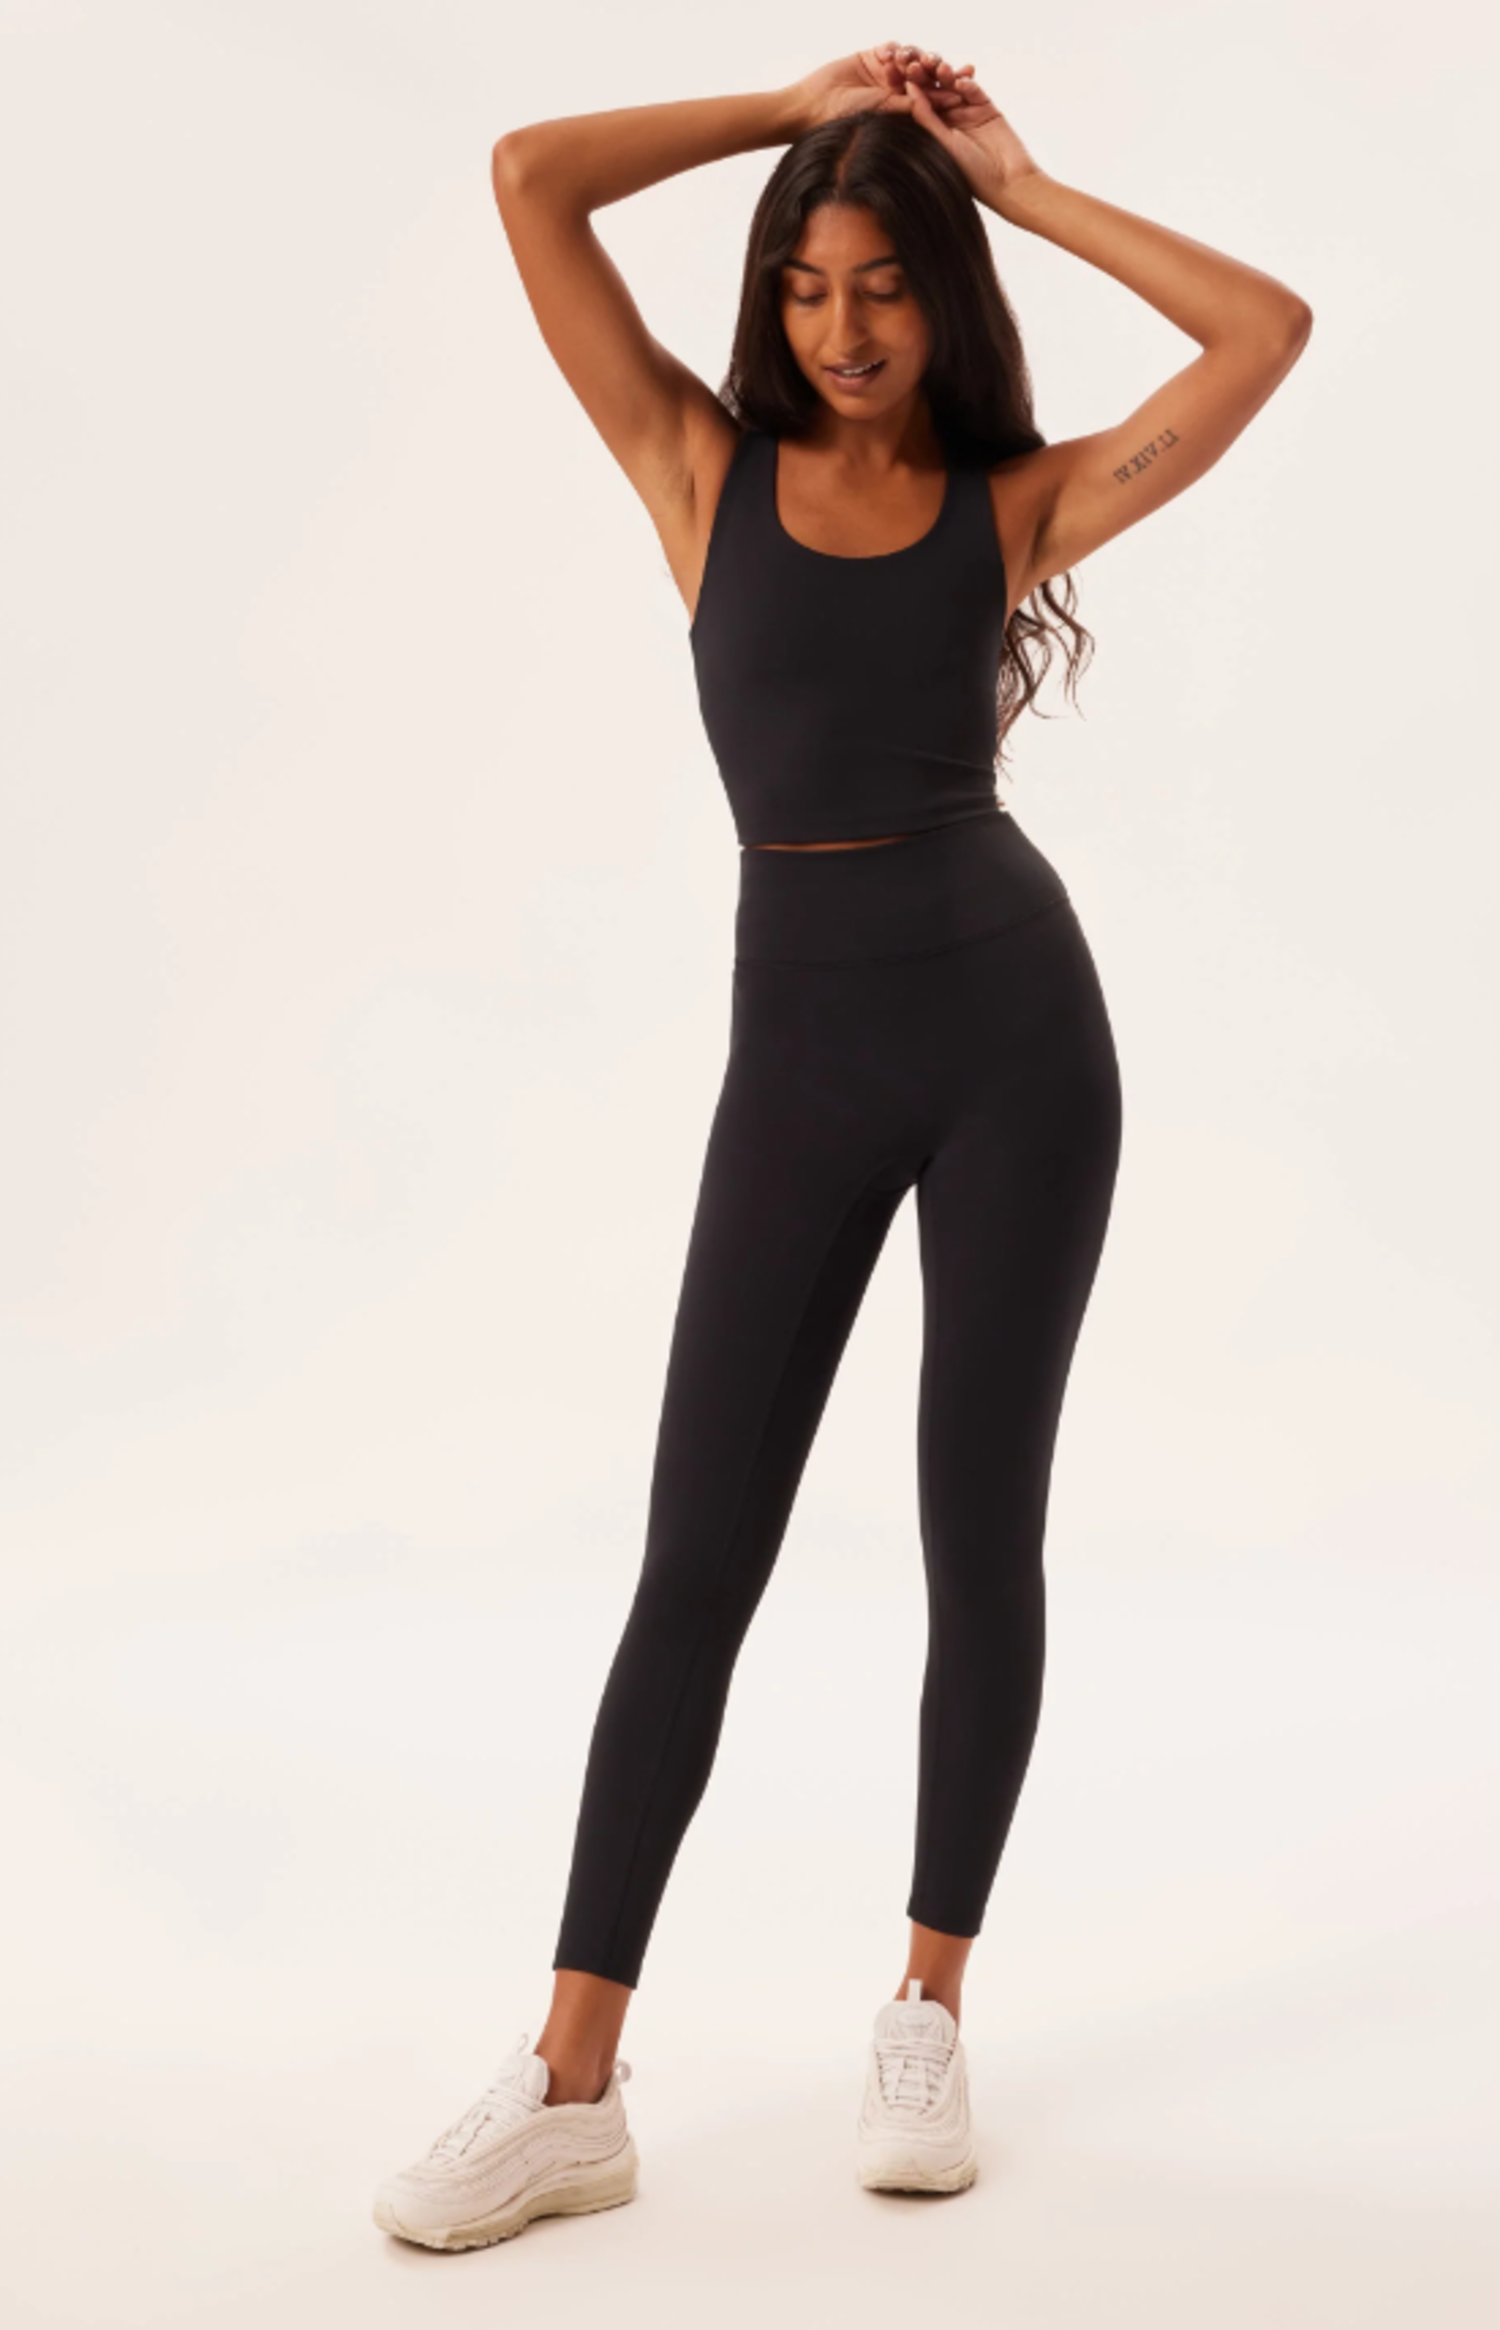 Blue Luxe Sport Leggings by Girlfriend Collective on Sale